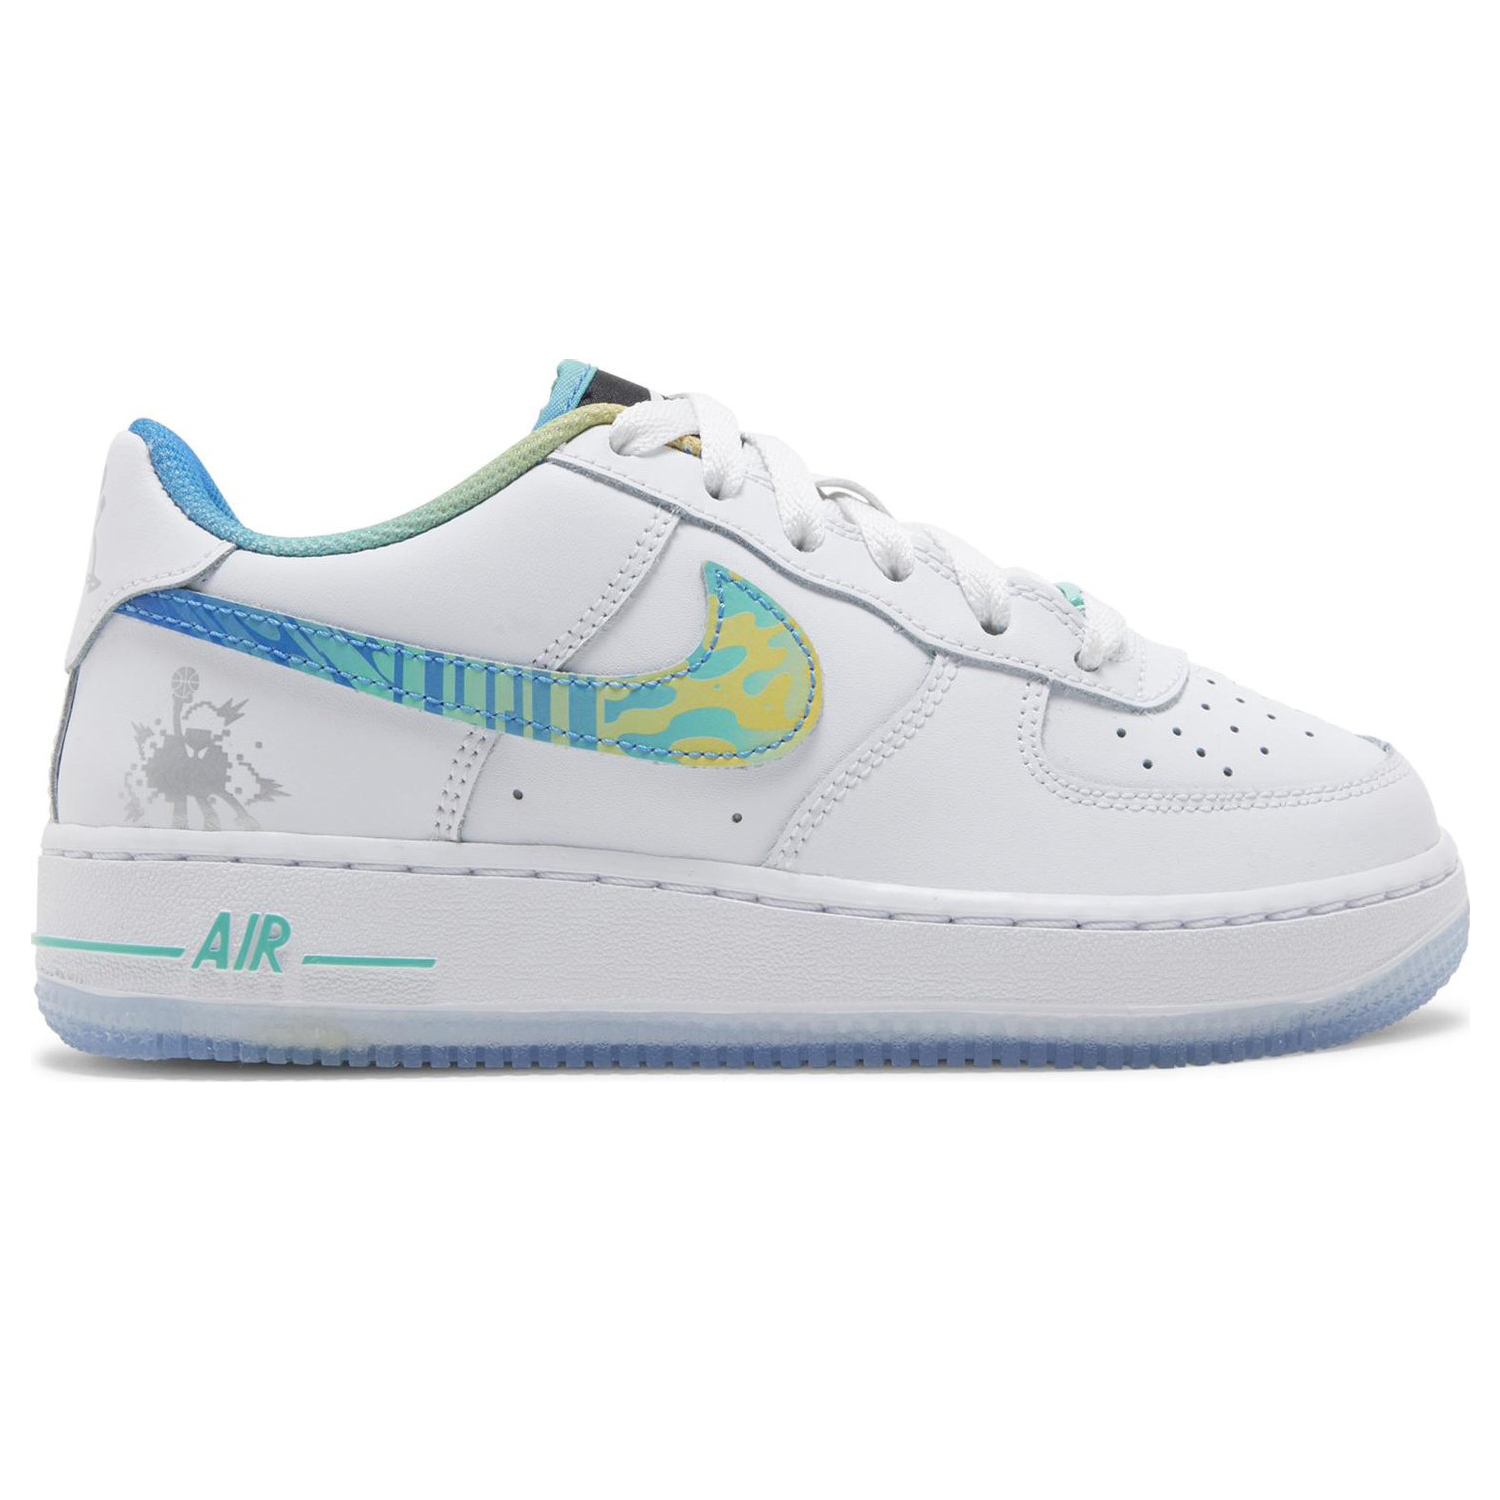 unlock your imagination Кроссовки Nike Air Force 1 LV8 GS 'Unlock Your Space', белый